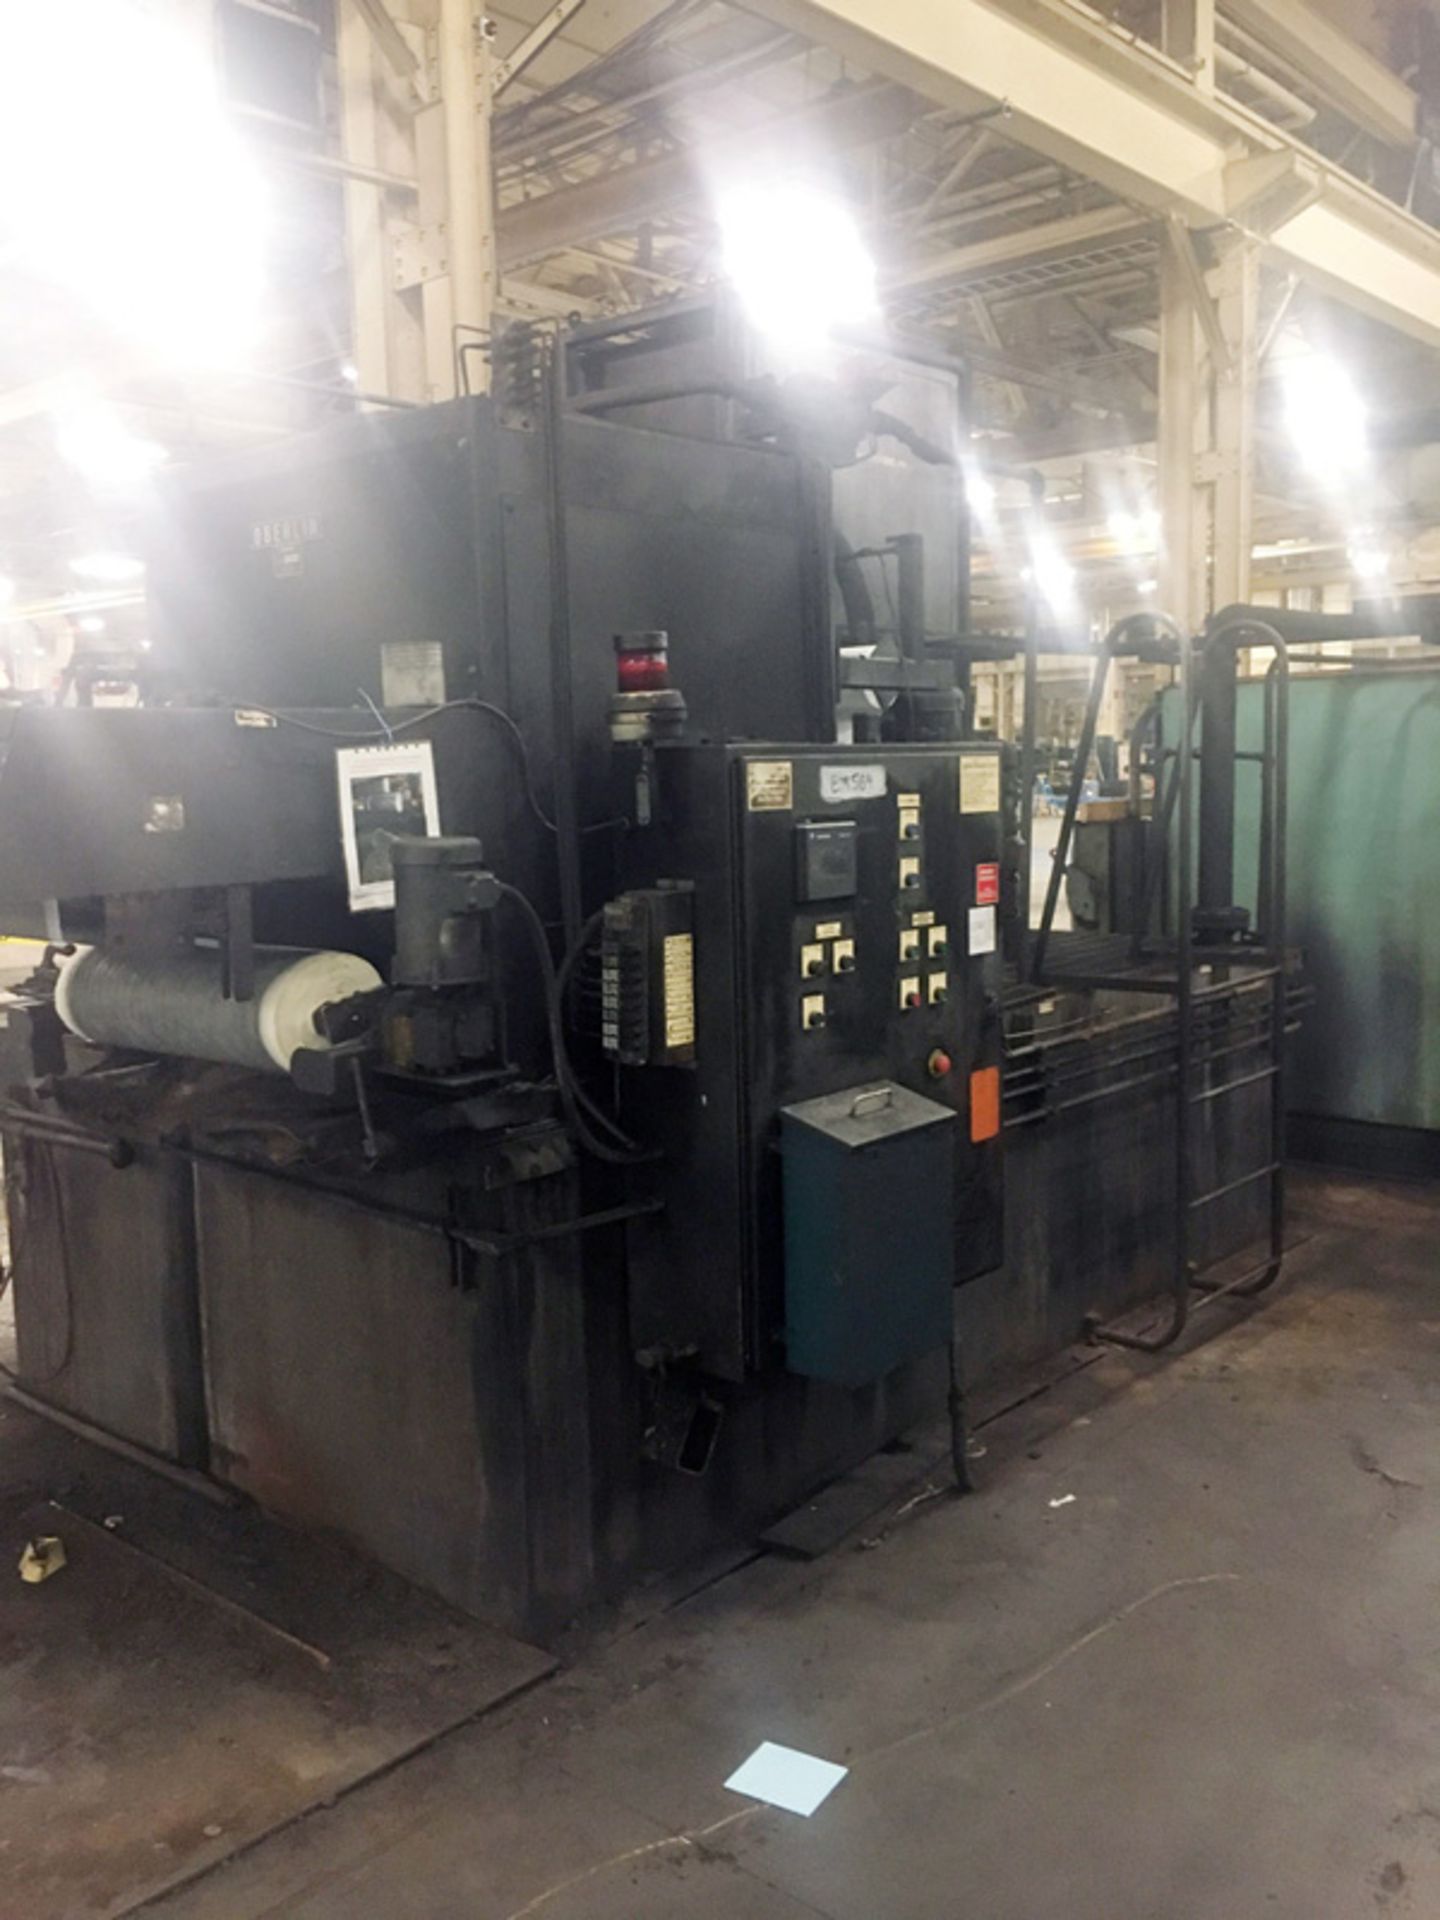 2002 Reform Twin Table CNC Knife Grinder 15" x 98" Each Table, Mdl: AR70 Type 8CNC, S/N: 7077, - Image 17 of 18